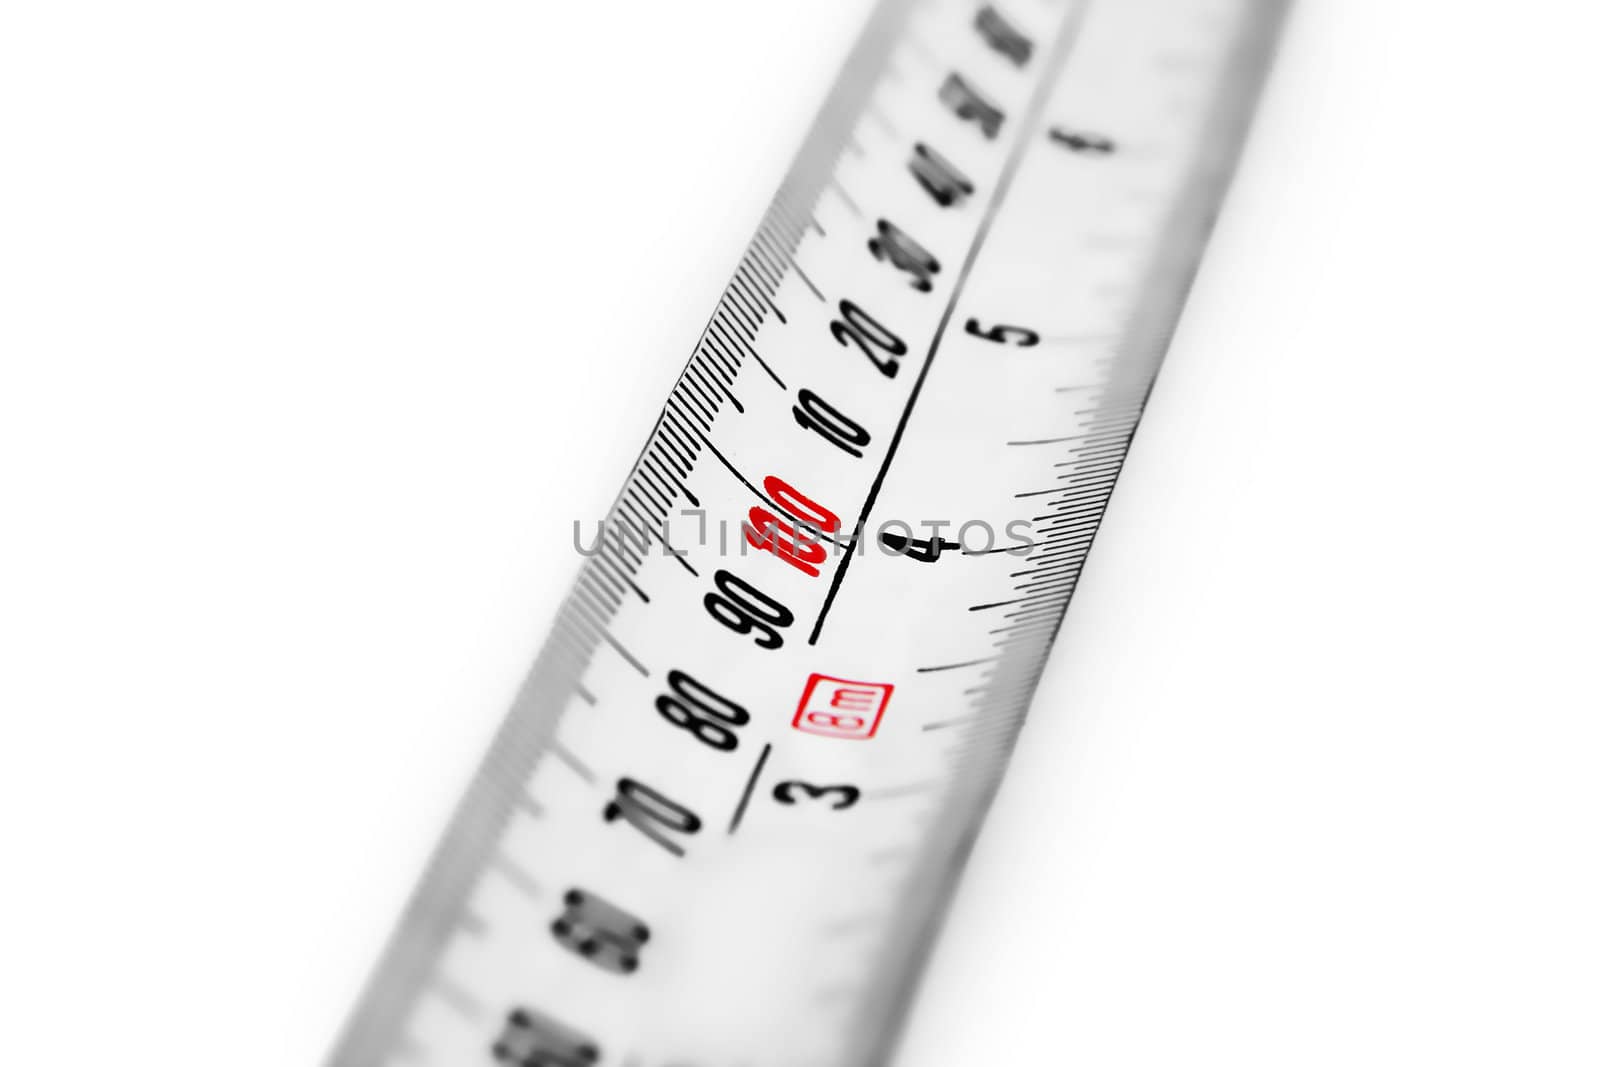 Macro shot of a tape measure against white